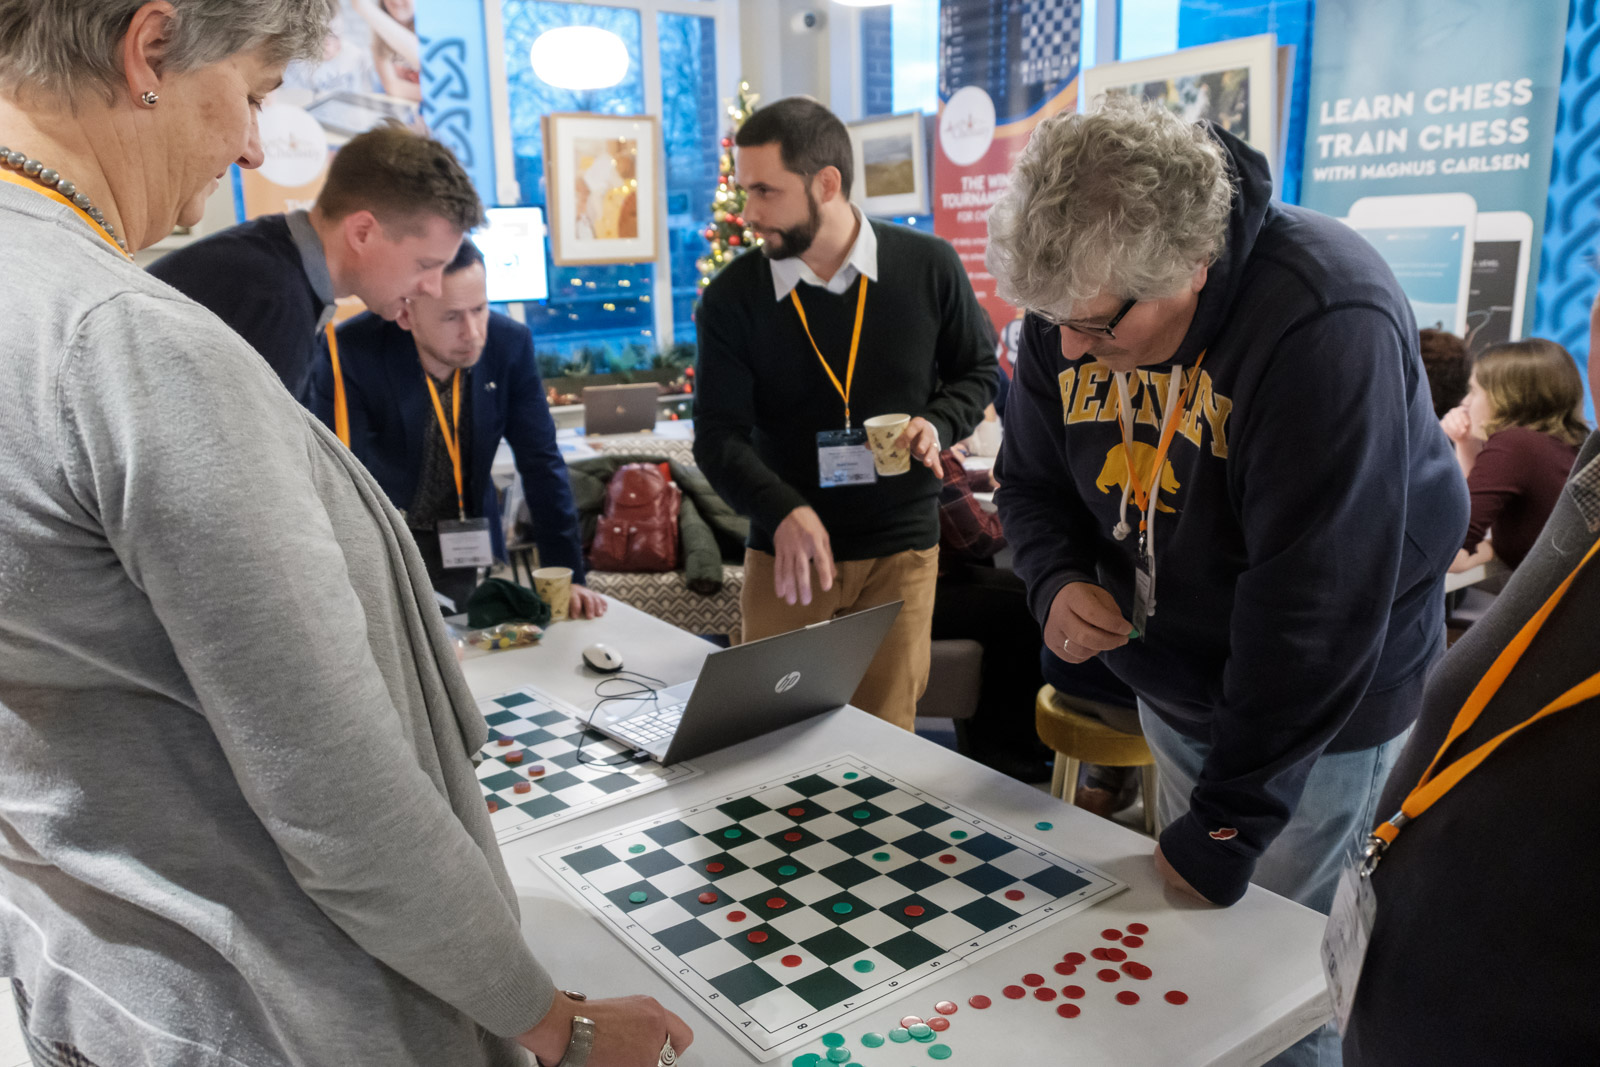 London Chess Conference, Day 1, 30 November 2019